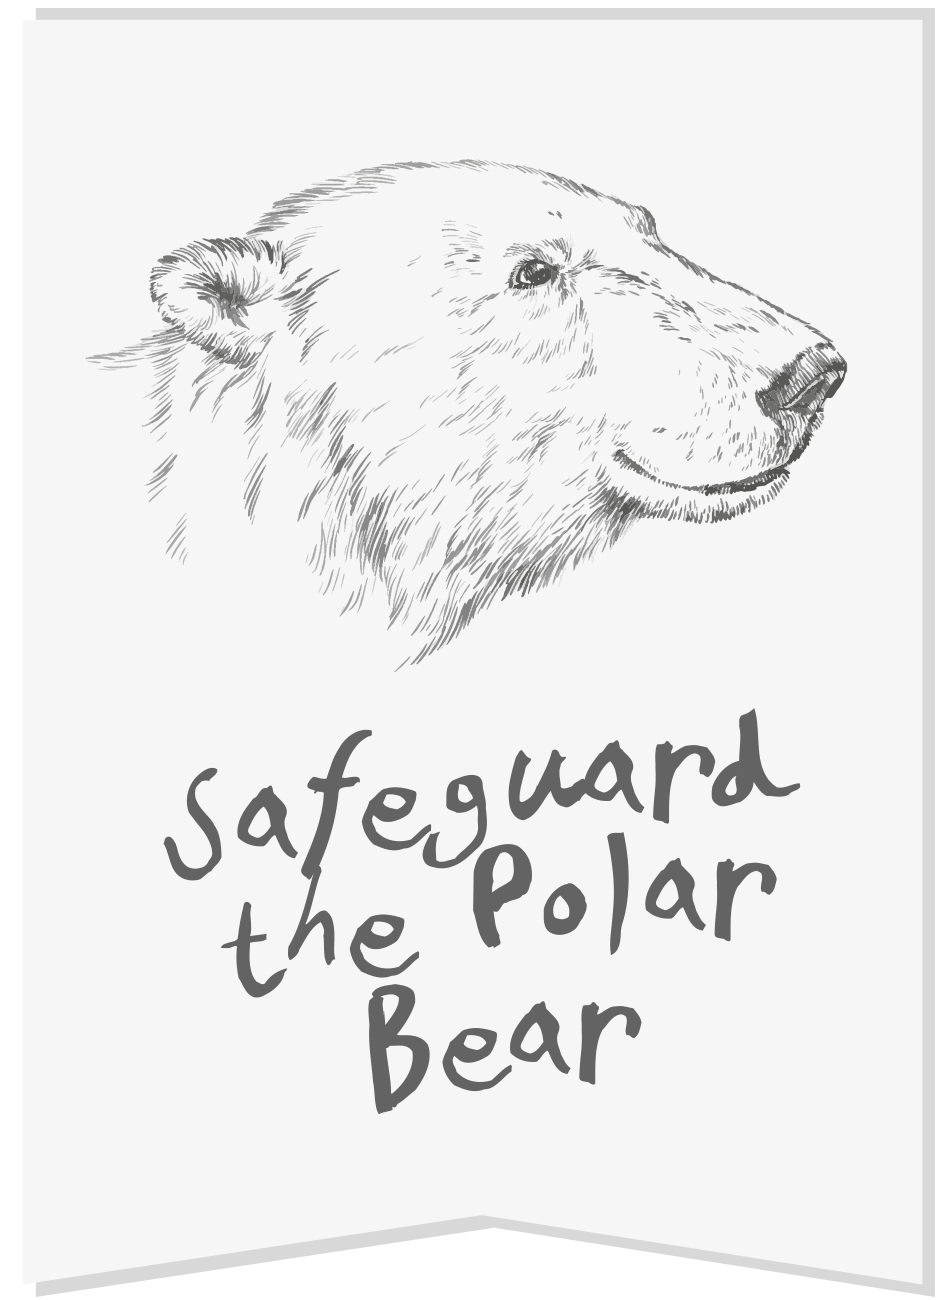 The polar bear is the biggest land predator on Earth. It plays a crucial 
role in maintaining the natural balance in the Arctic. The polar bear is listed on the IUCN Red List of Threatened Species and the Russian Red Data Book as an endangered species.